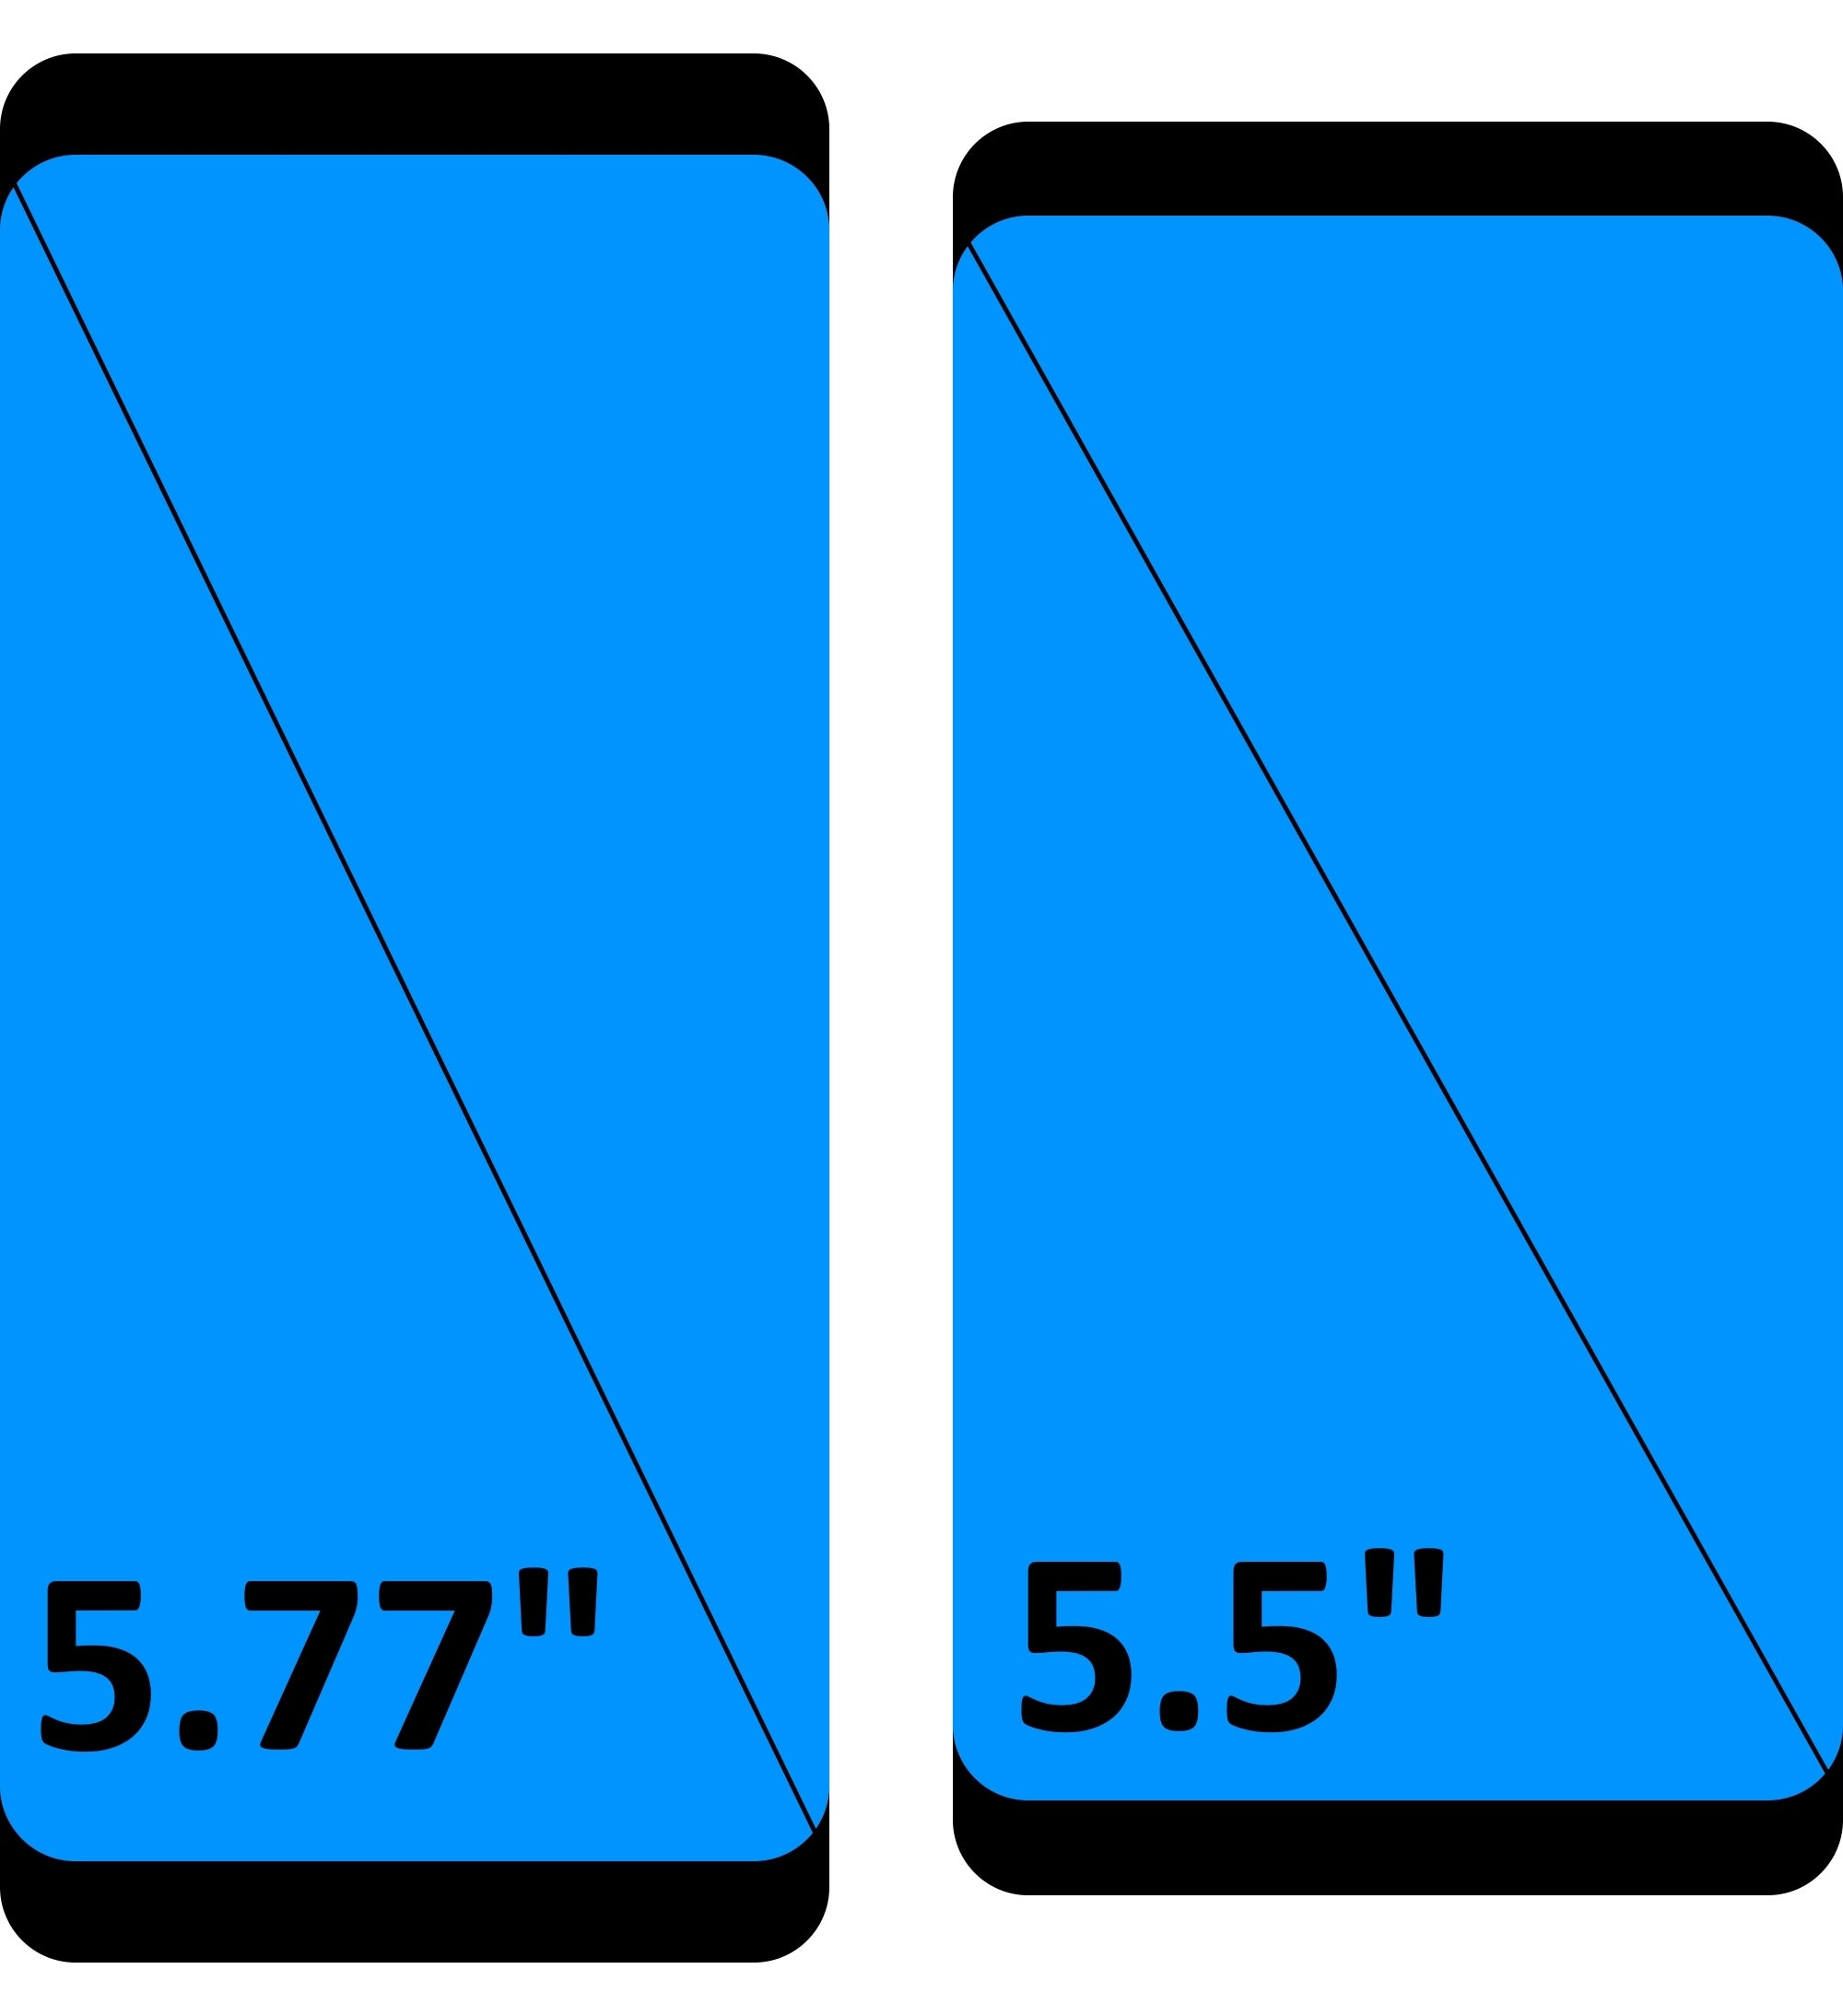 Samsung Galaxy S8 display: What's the deal with the new aspect ratio?